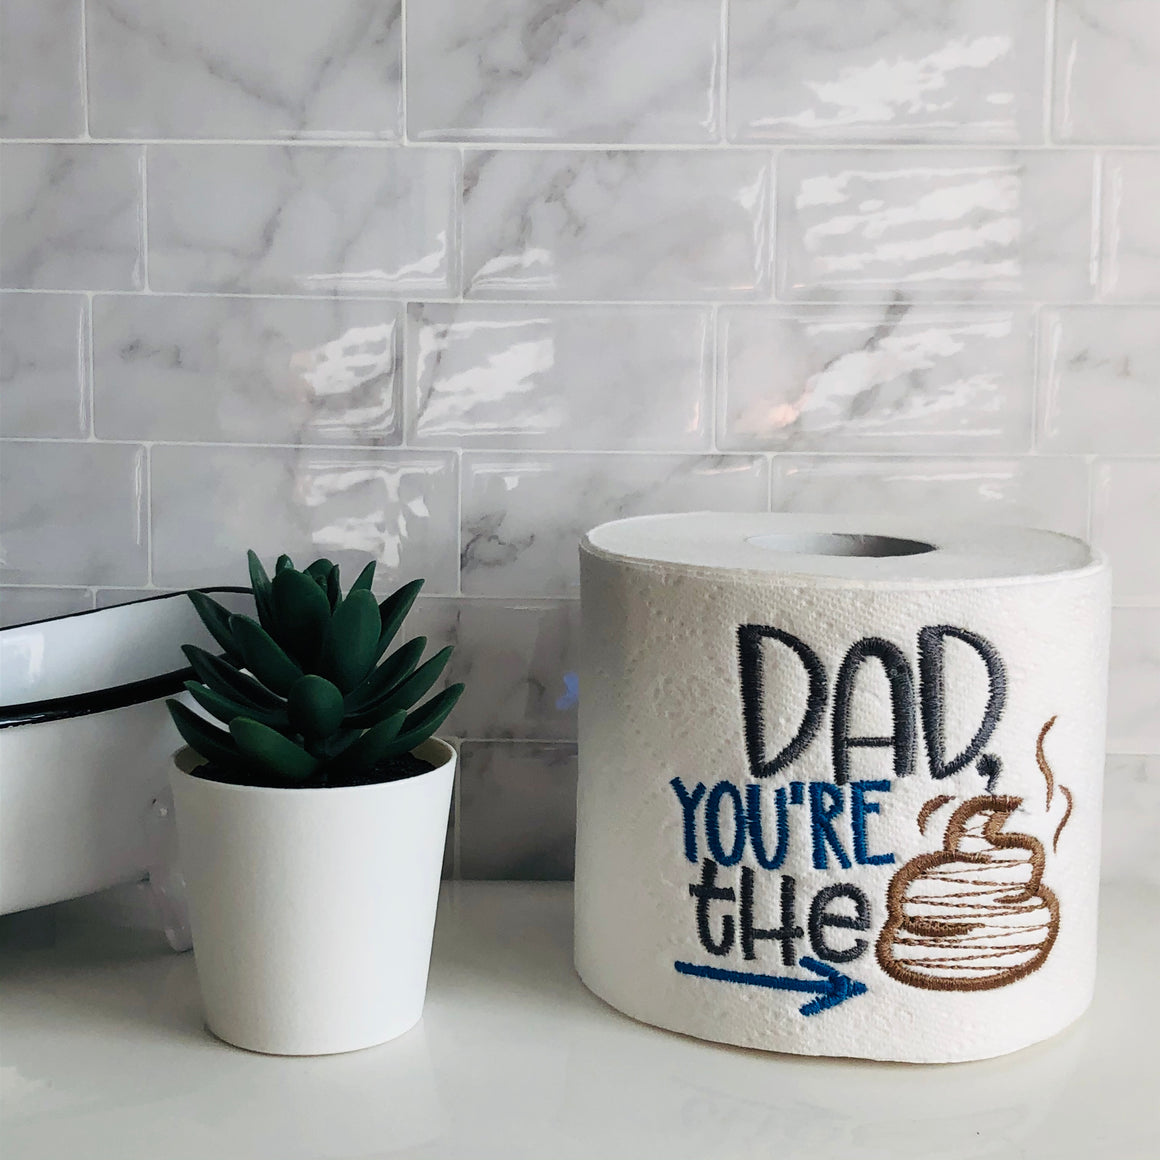 "Dad, You're the !" Funny Toilet Paper Dad Gift